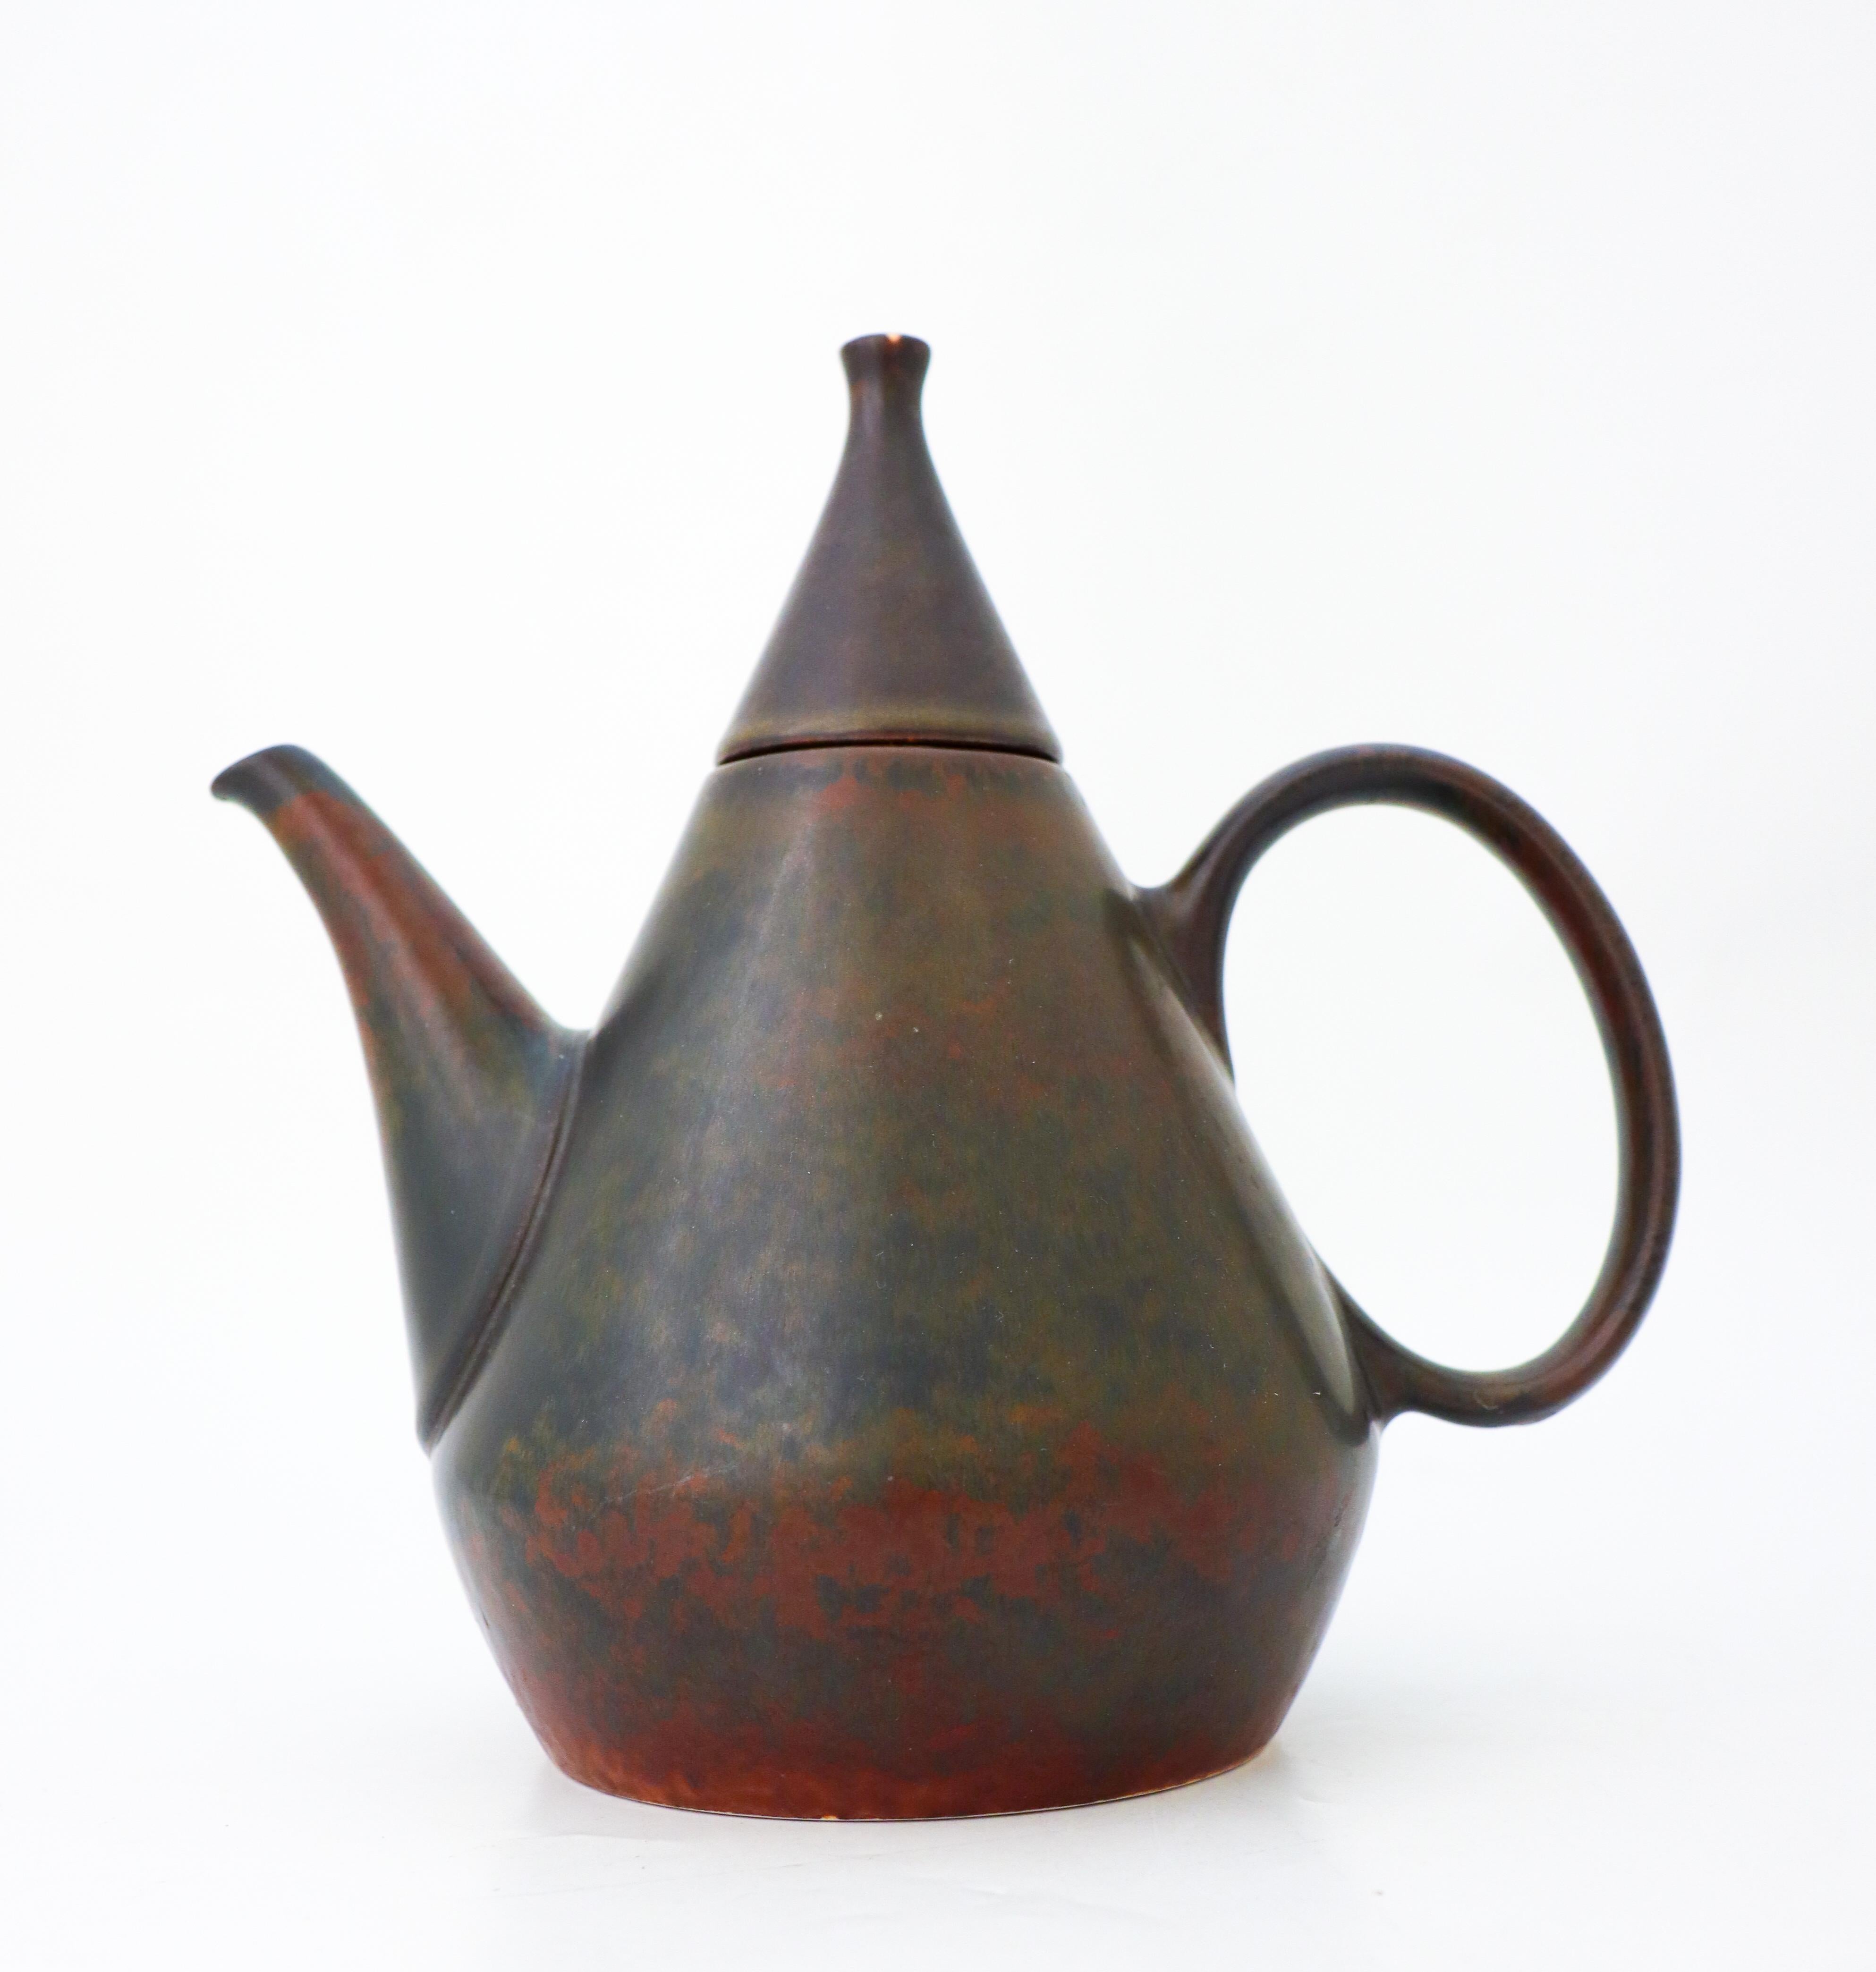 A brown teapot in ceramics with a lovely harfur glaze designed by Carl-Harry Stålhane at Rörstrand, Sweden in the 1950s. The teapot is 21,5 cm high and in excellent condition, it is marked as 2nd quality. The pot holds about one litre. 

Carl-Harry